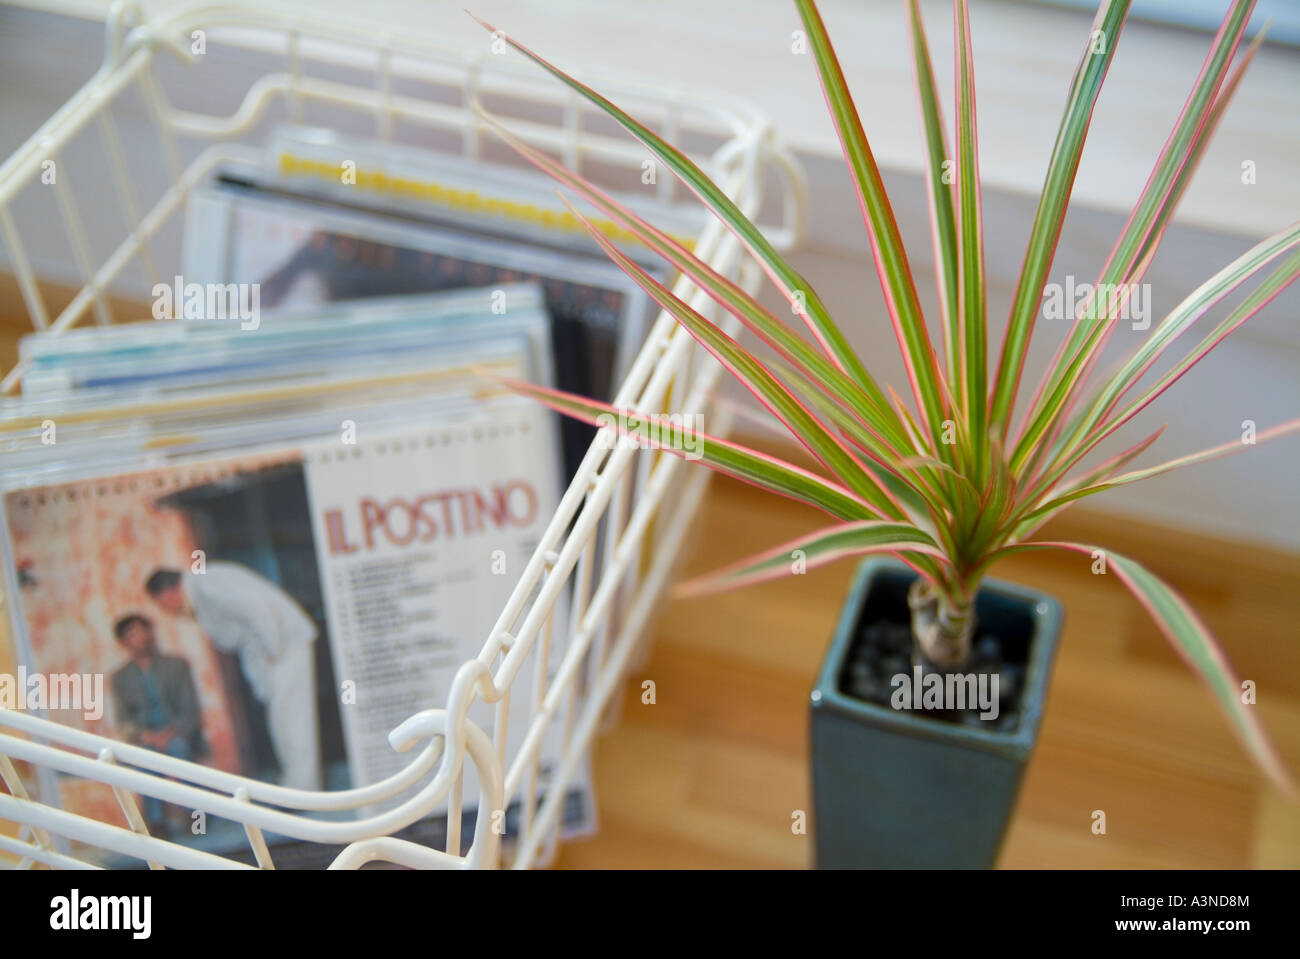 Potted plant and music CDs Stock Photo